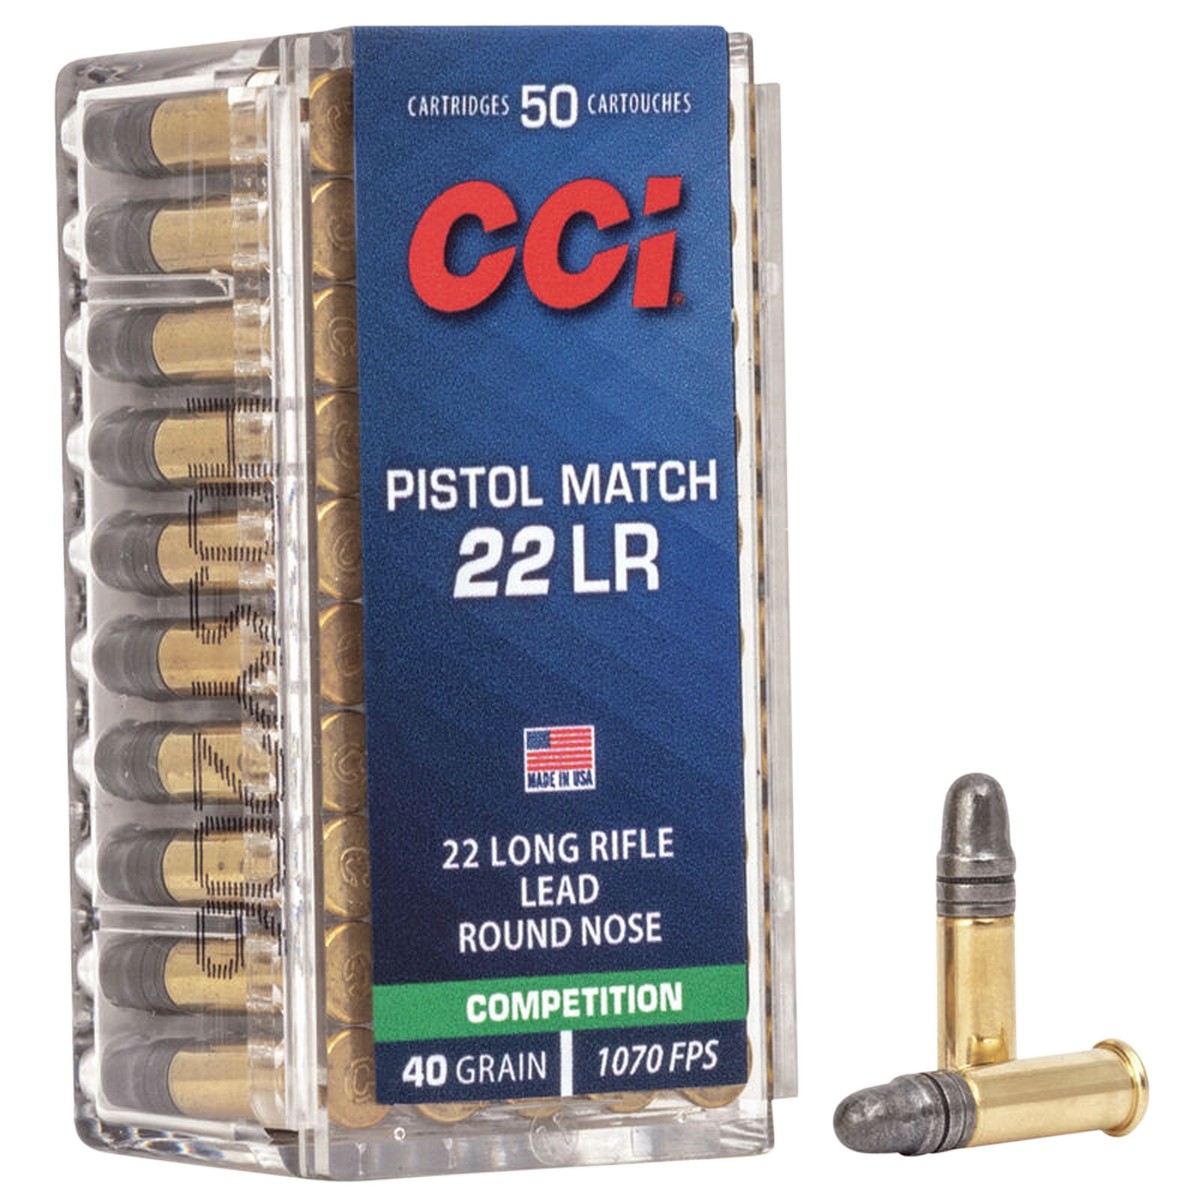  Competition Pistol Match 22 LR 40 Gr Lead Round Nose Ammo